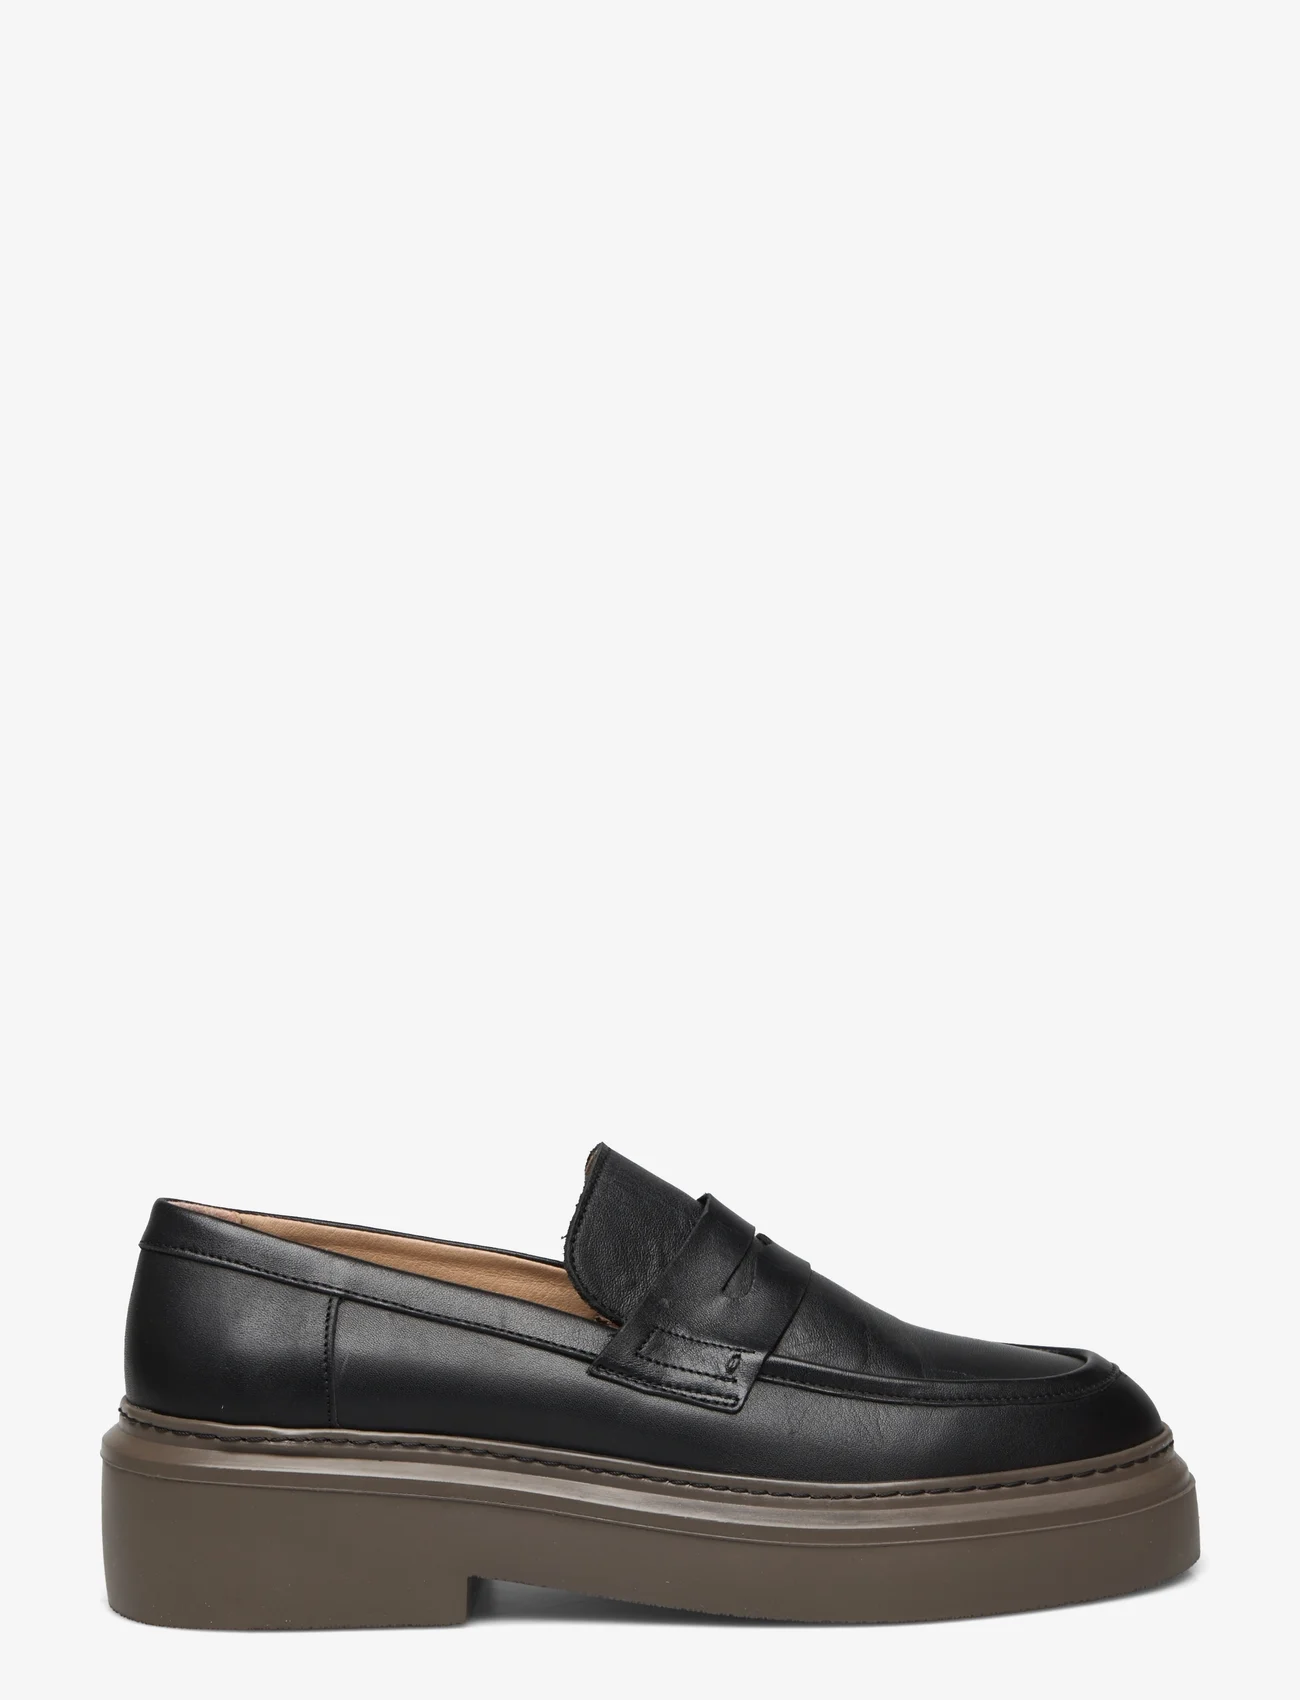 Garment Project - June Loafer - Black Leather / Brown Sole - birthday gifts - black - 1